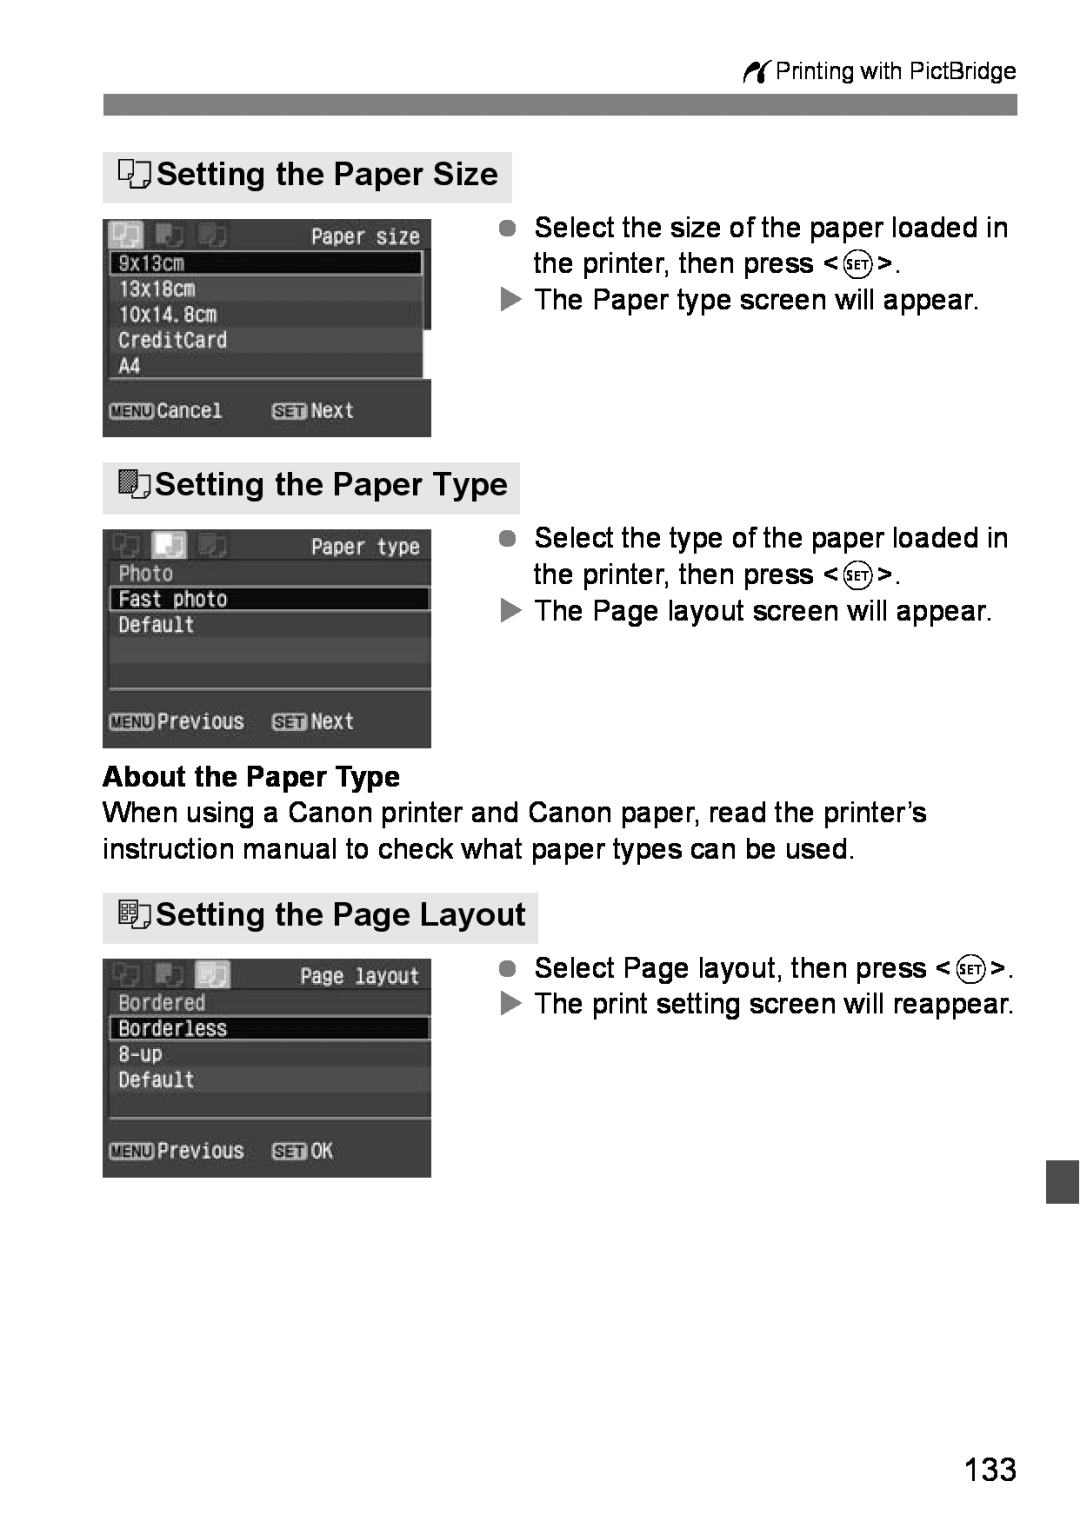 Canon EOS DIGITAL REBEL XTI instruction manual QSetting the Paper Size, YSetting the Paper Type, USetting the Page Layout 